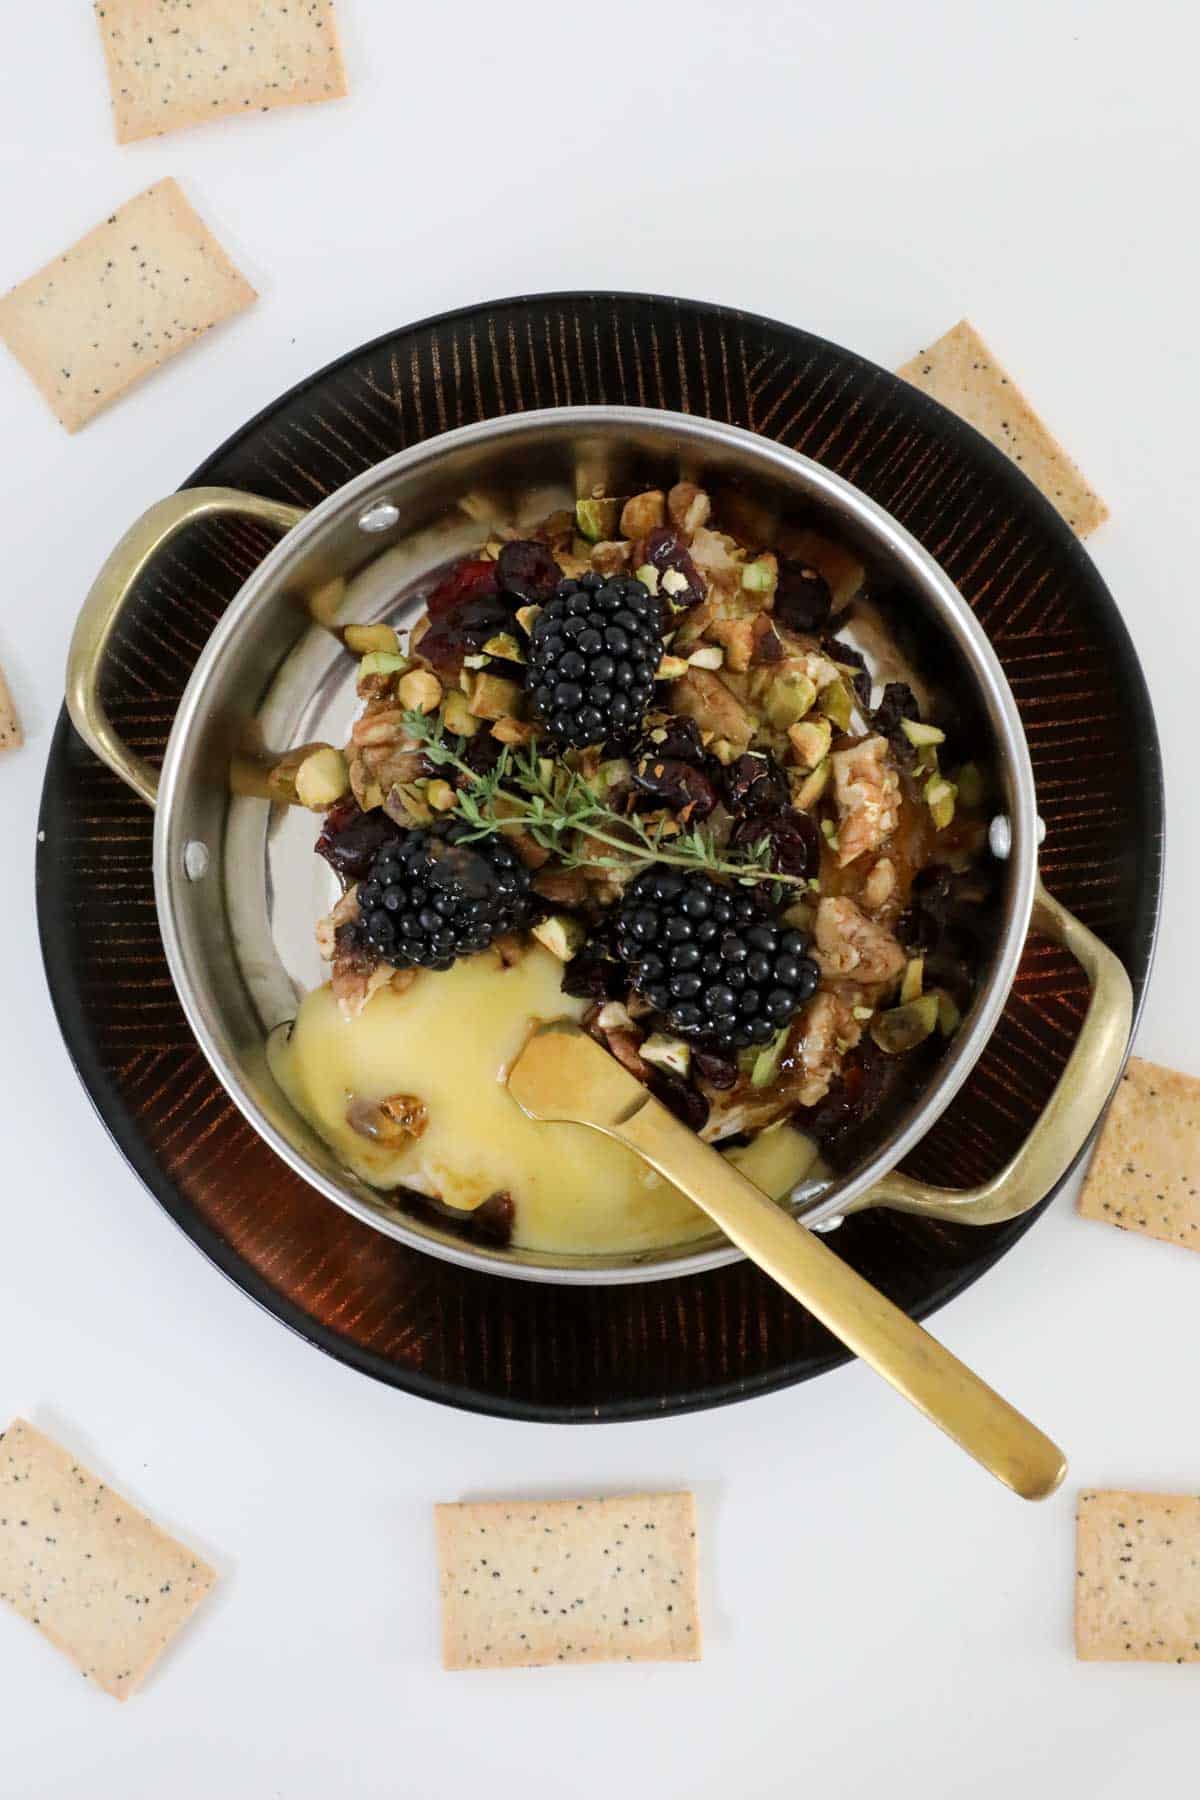 An overhead shot of a baked brie cheese with nuts, dried fruit anf fresh blackberries.